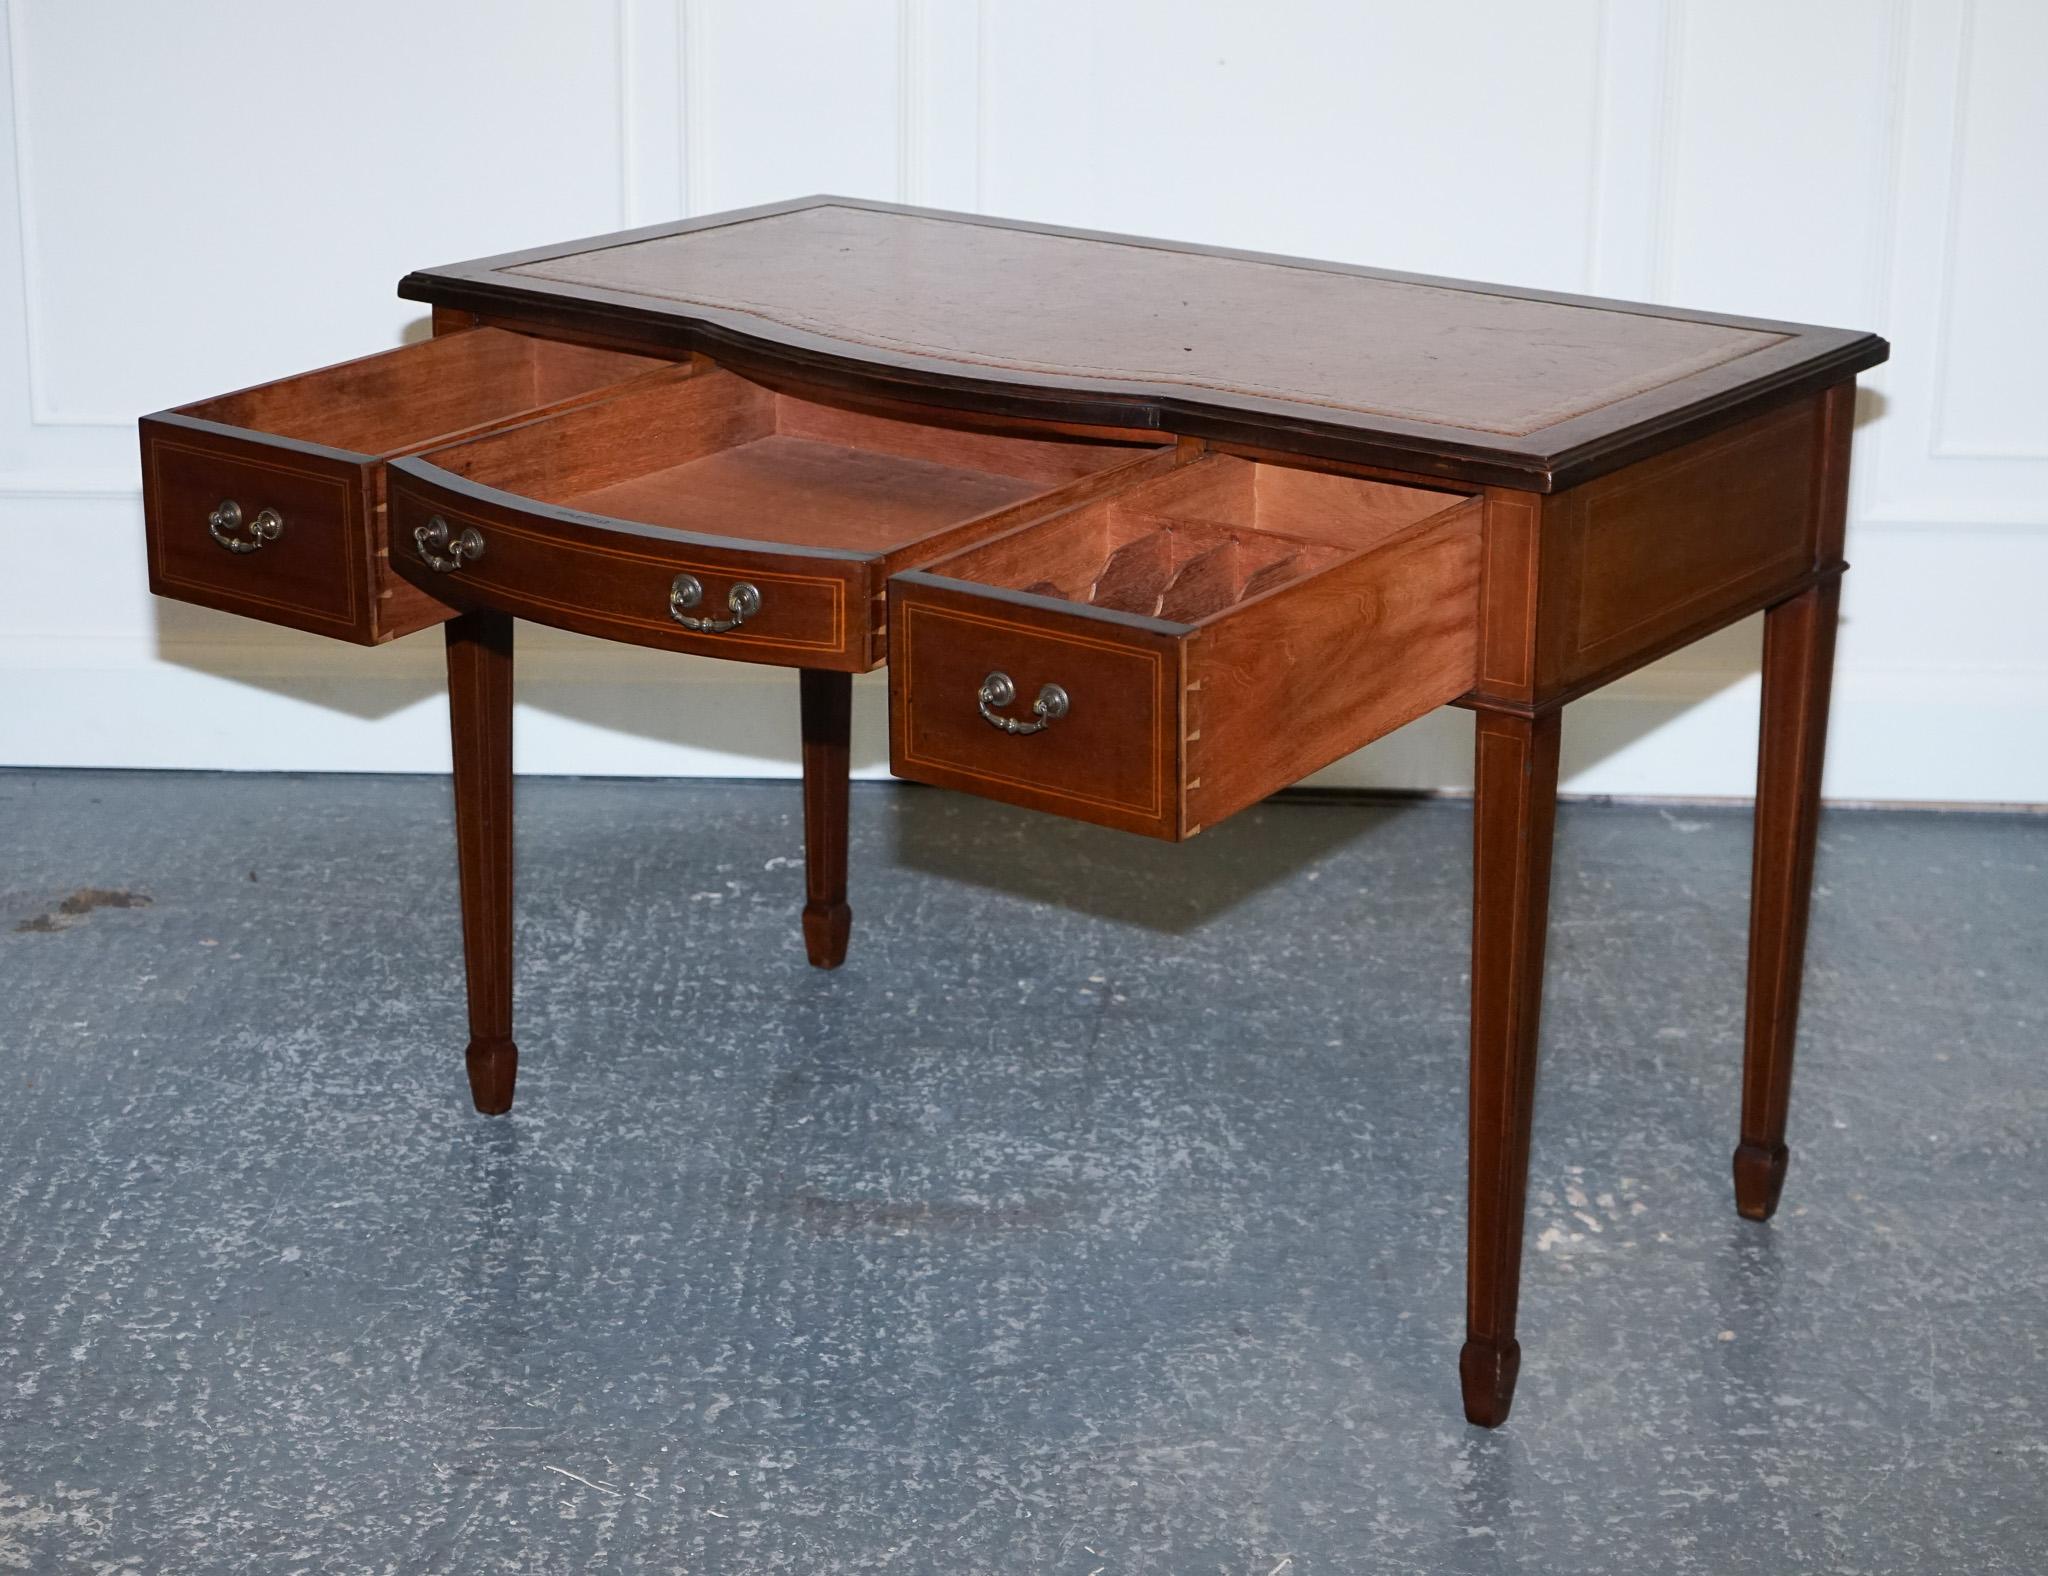 Hand-Crafted Edwardian 1880s Stamped Maple & Co Brown Leather Sheraton Writing Desk Table For Sale